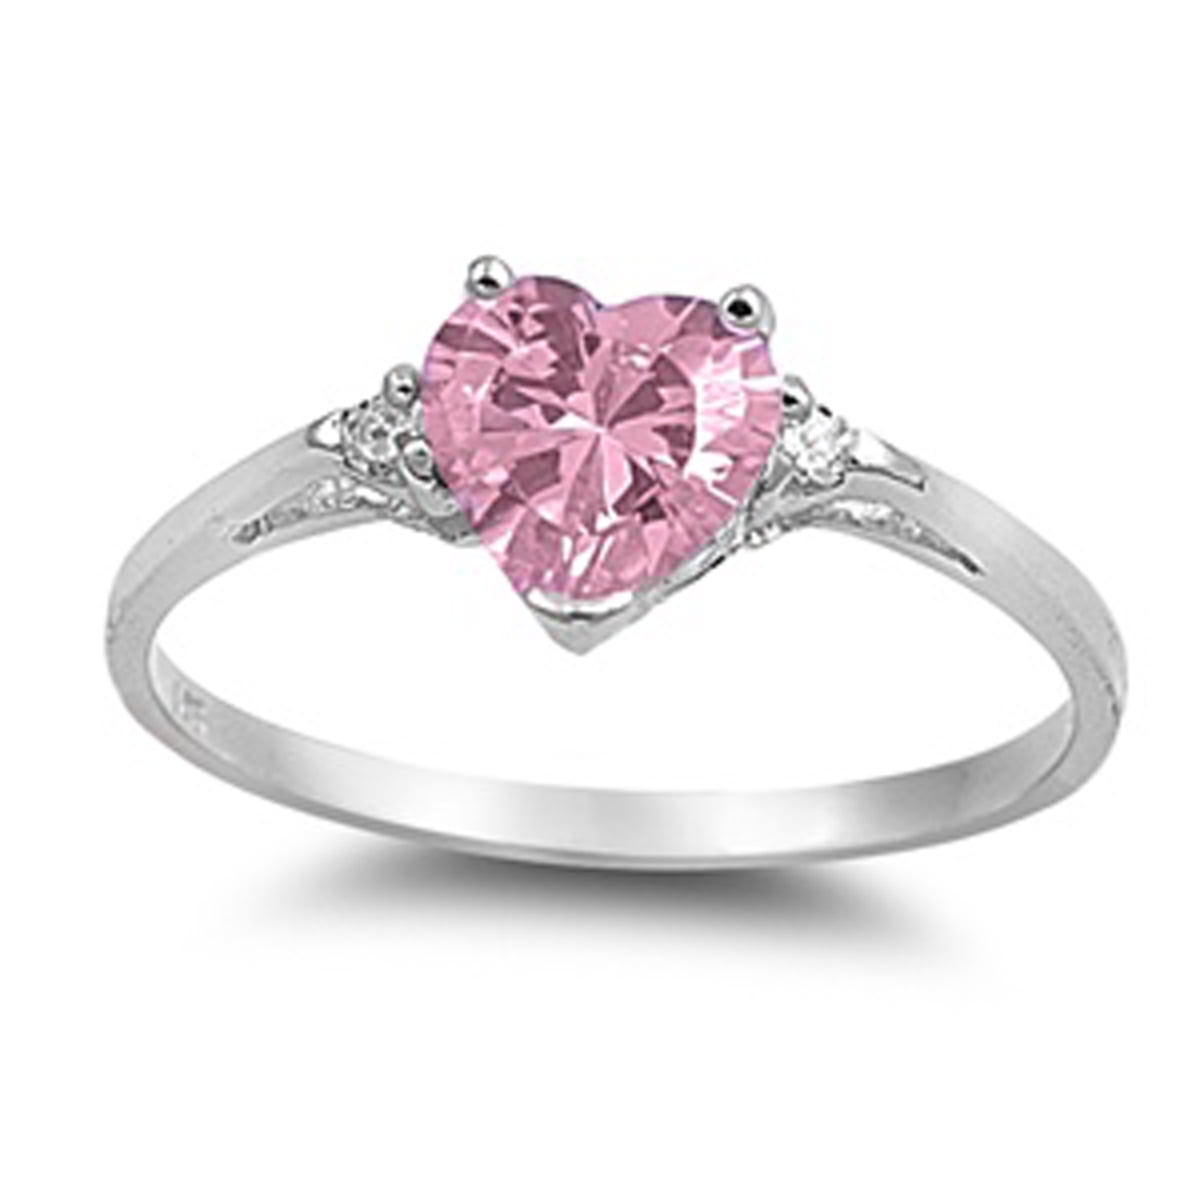 SOLITAIRE BEAUTIFUL RUSSIAN CZ HEART .925 Sterling Silver Ring Sizes 5-10 